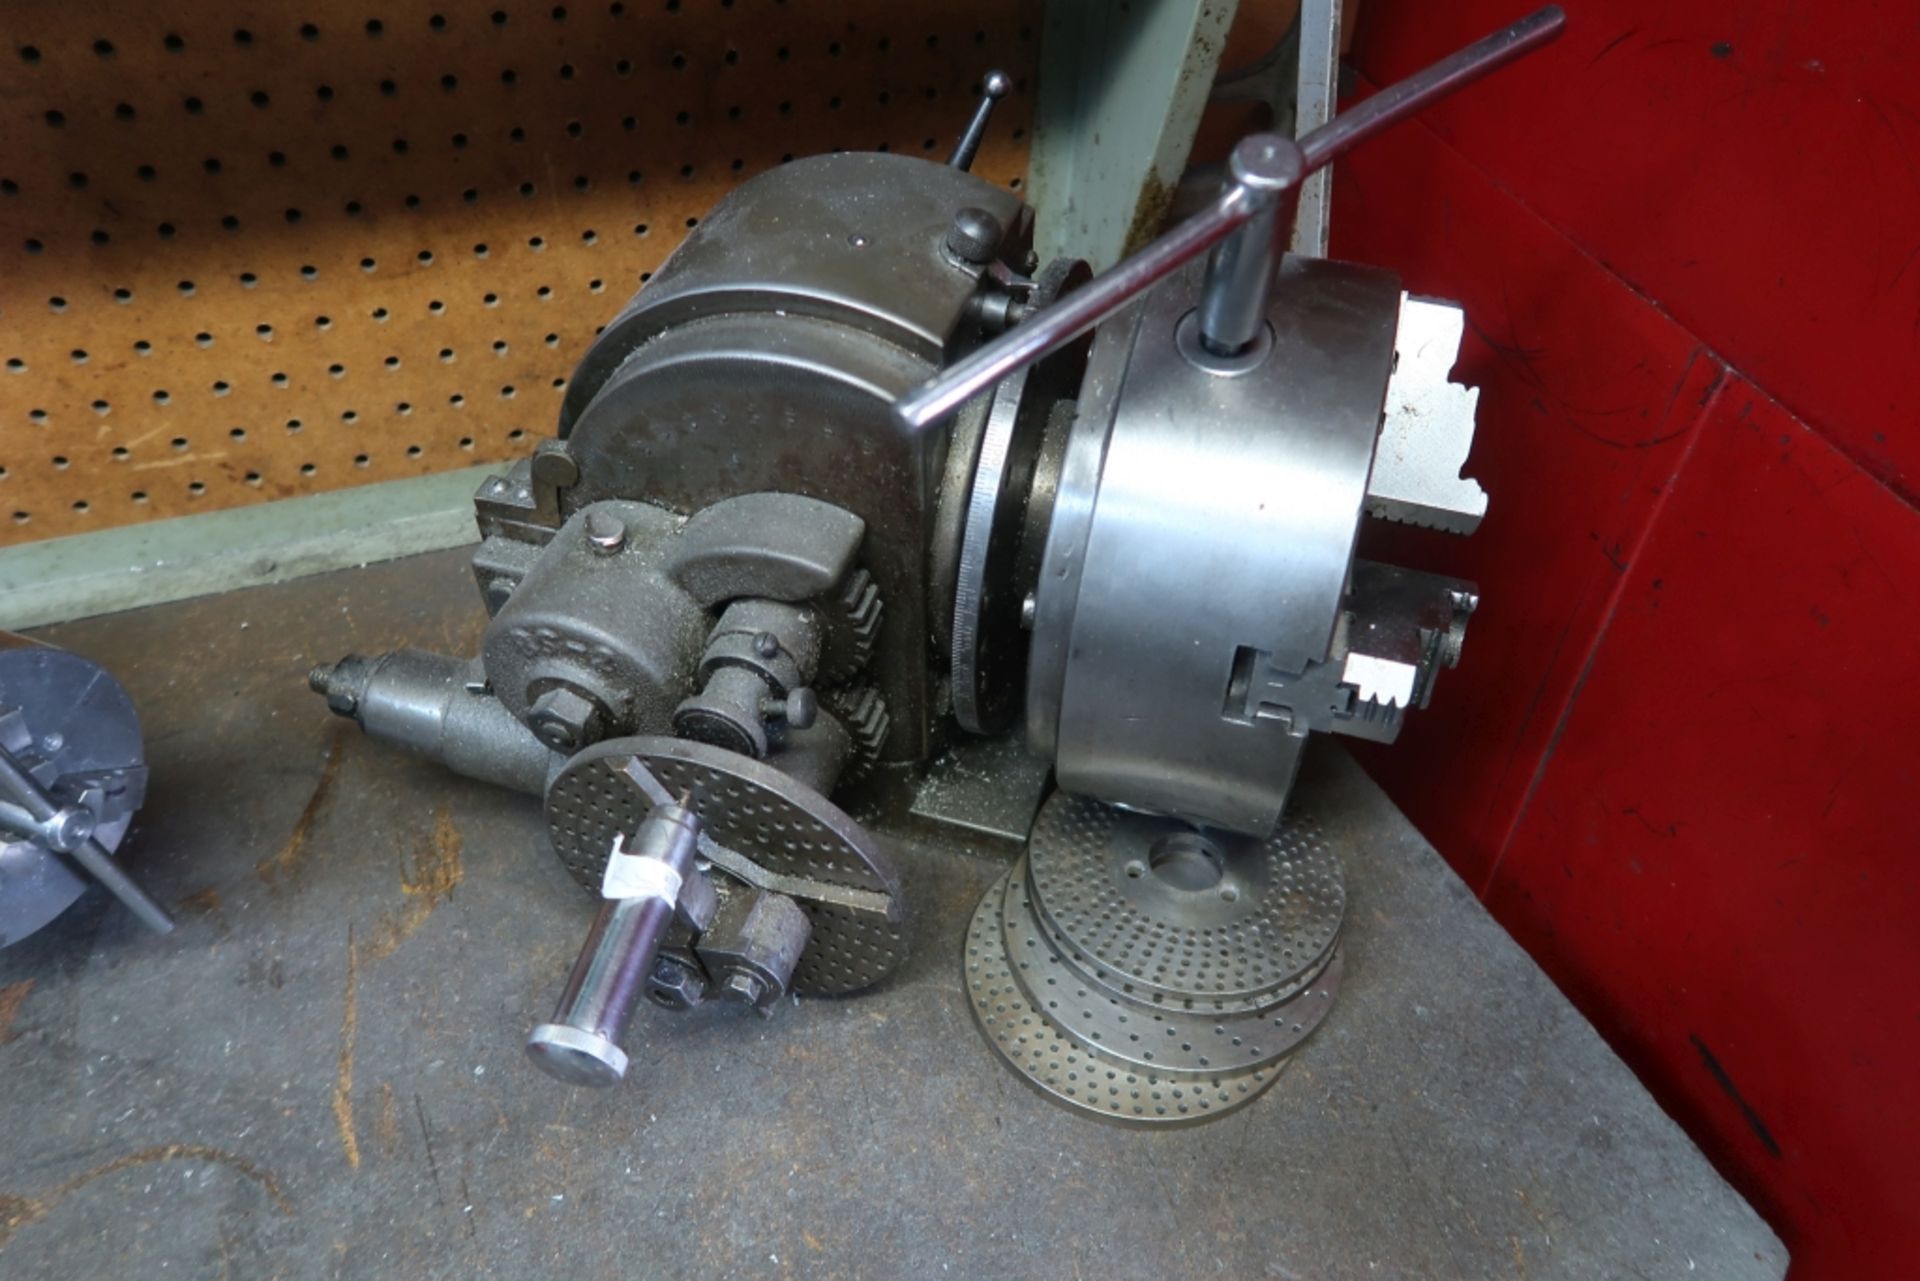 8'' CHUCK INDEXING HEAD *LOCATED AT 1515 PALERME ST., BROSSARD QC*